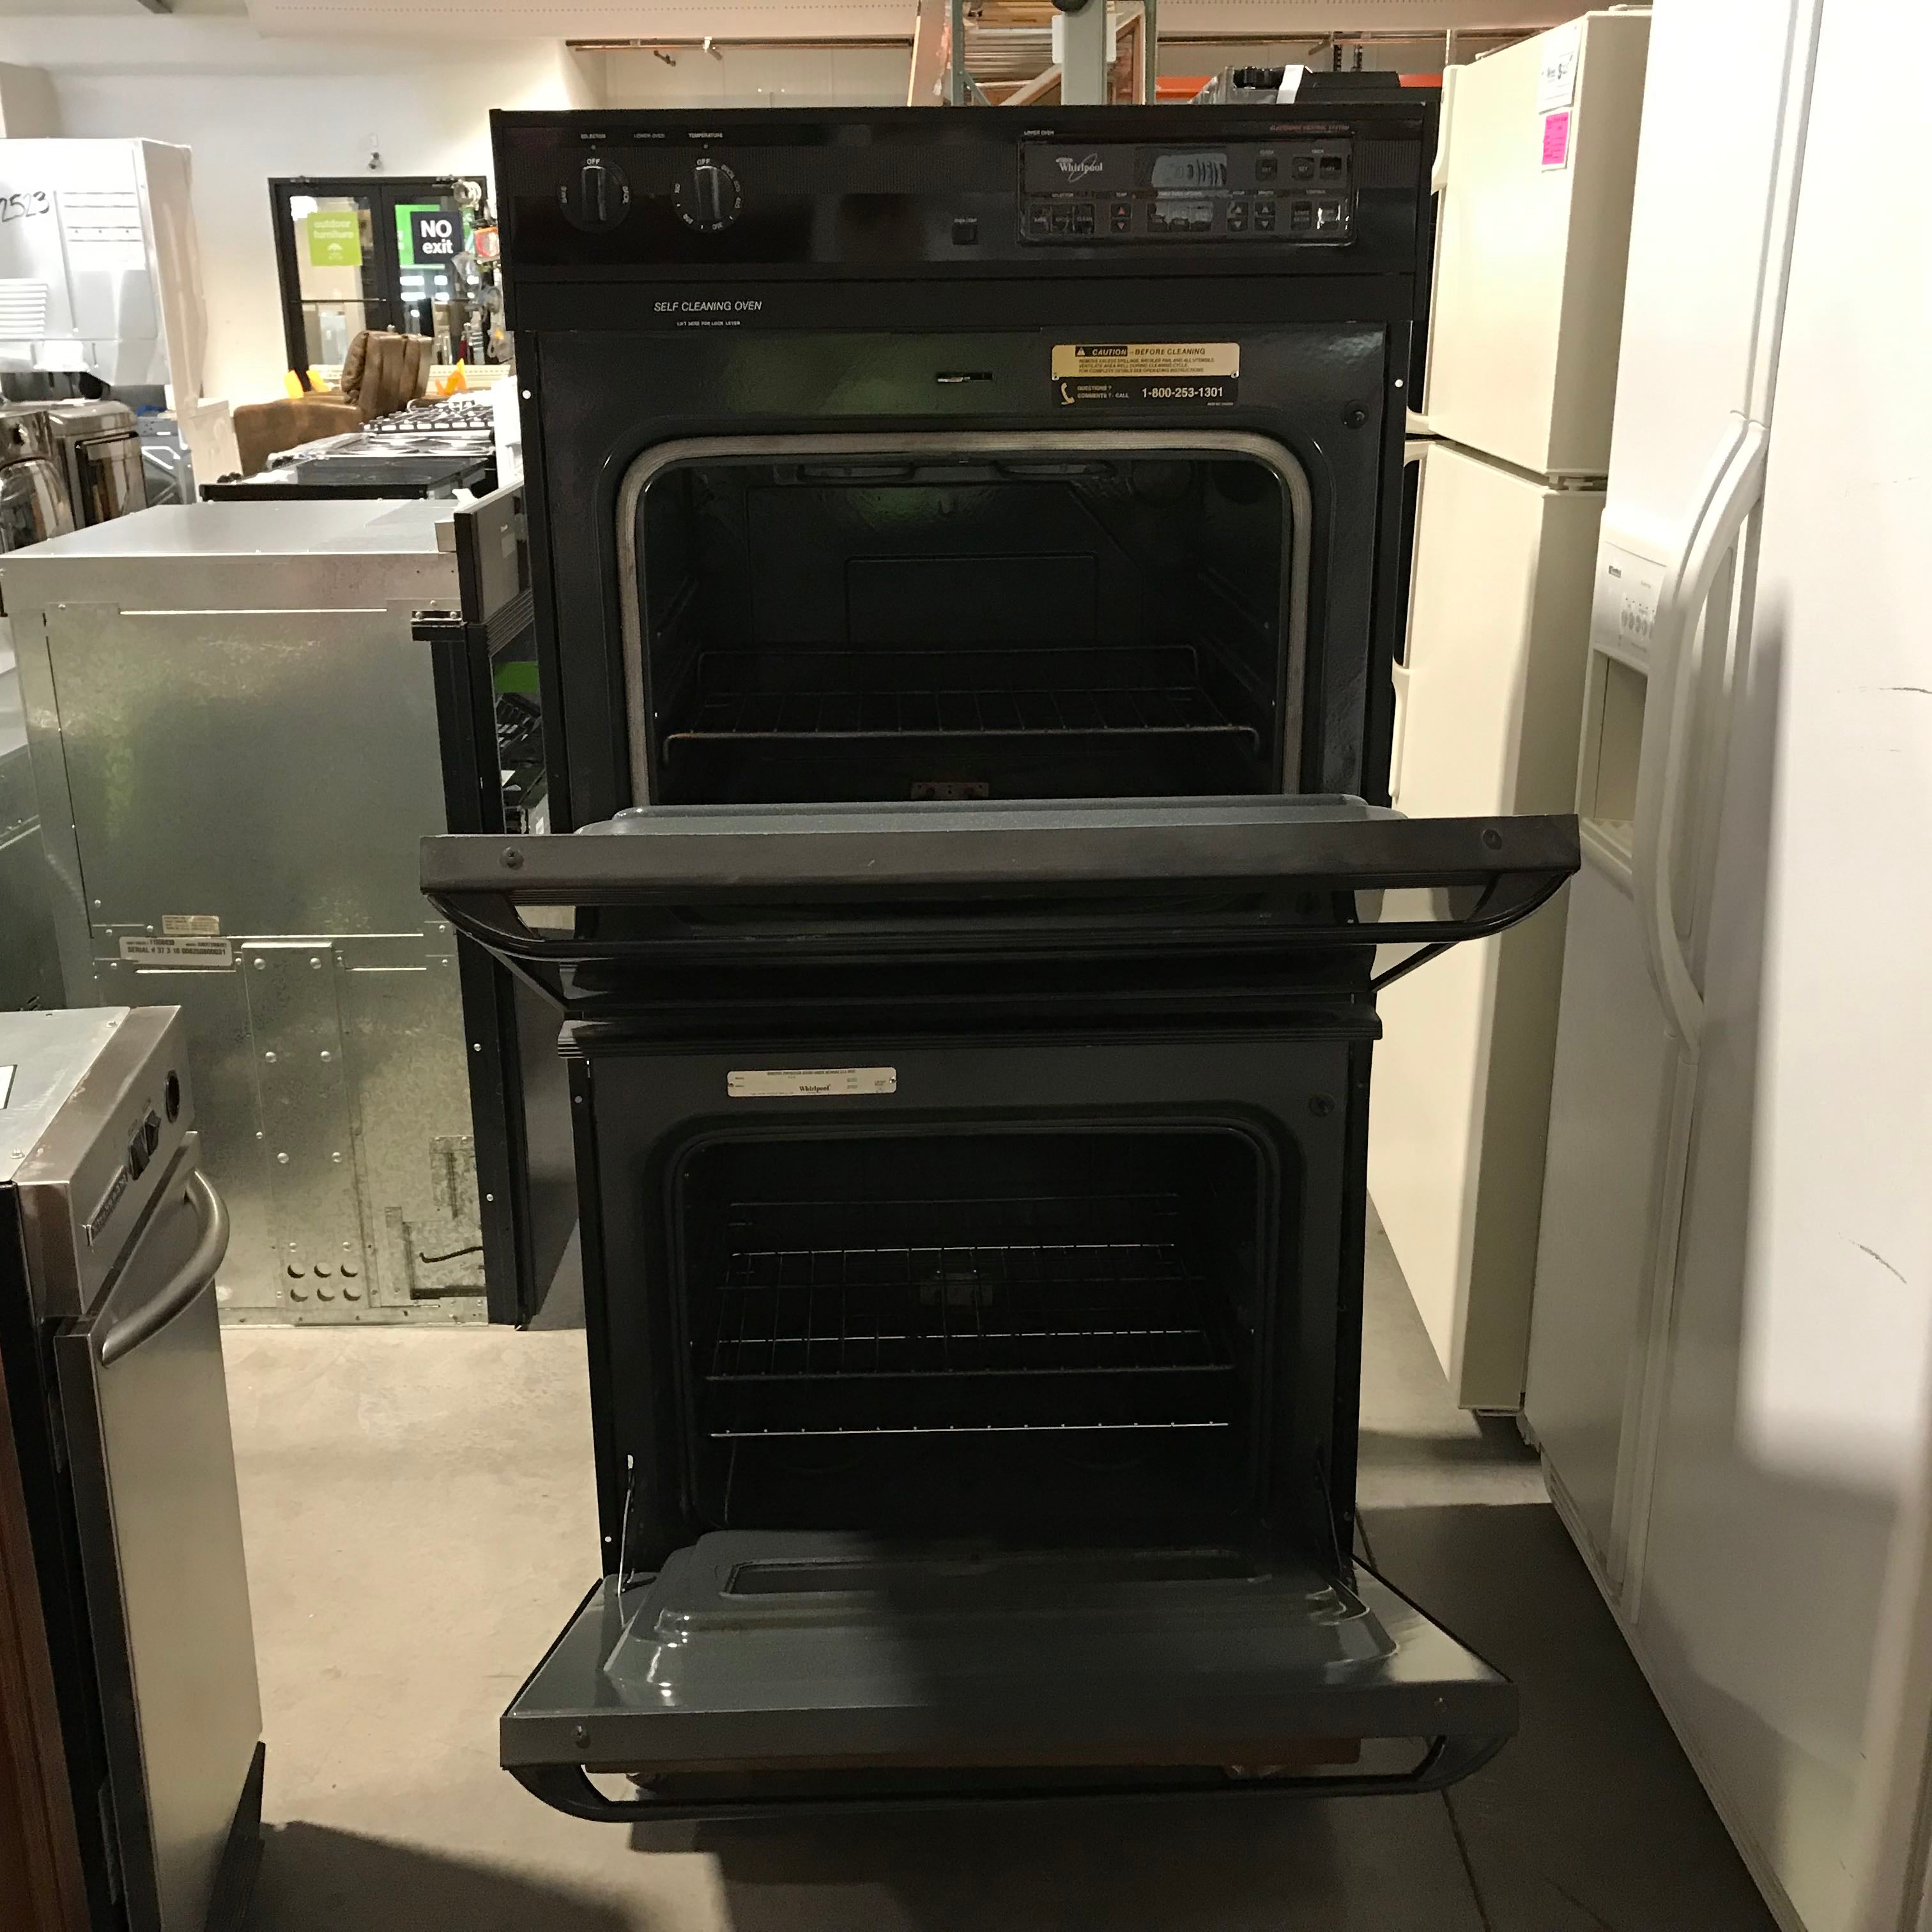 30"x 27"x 57.5" Whirlpool Black Double Oven Wall Oven